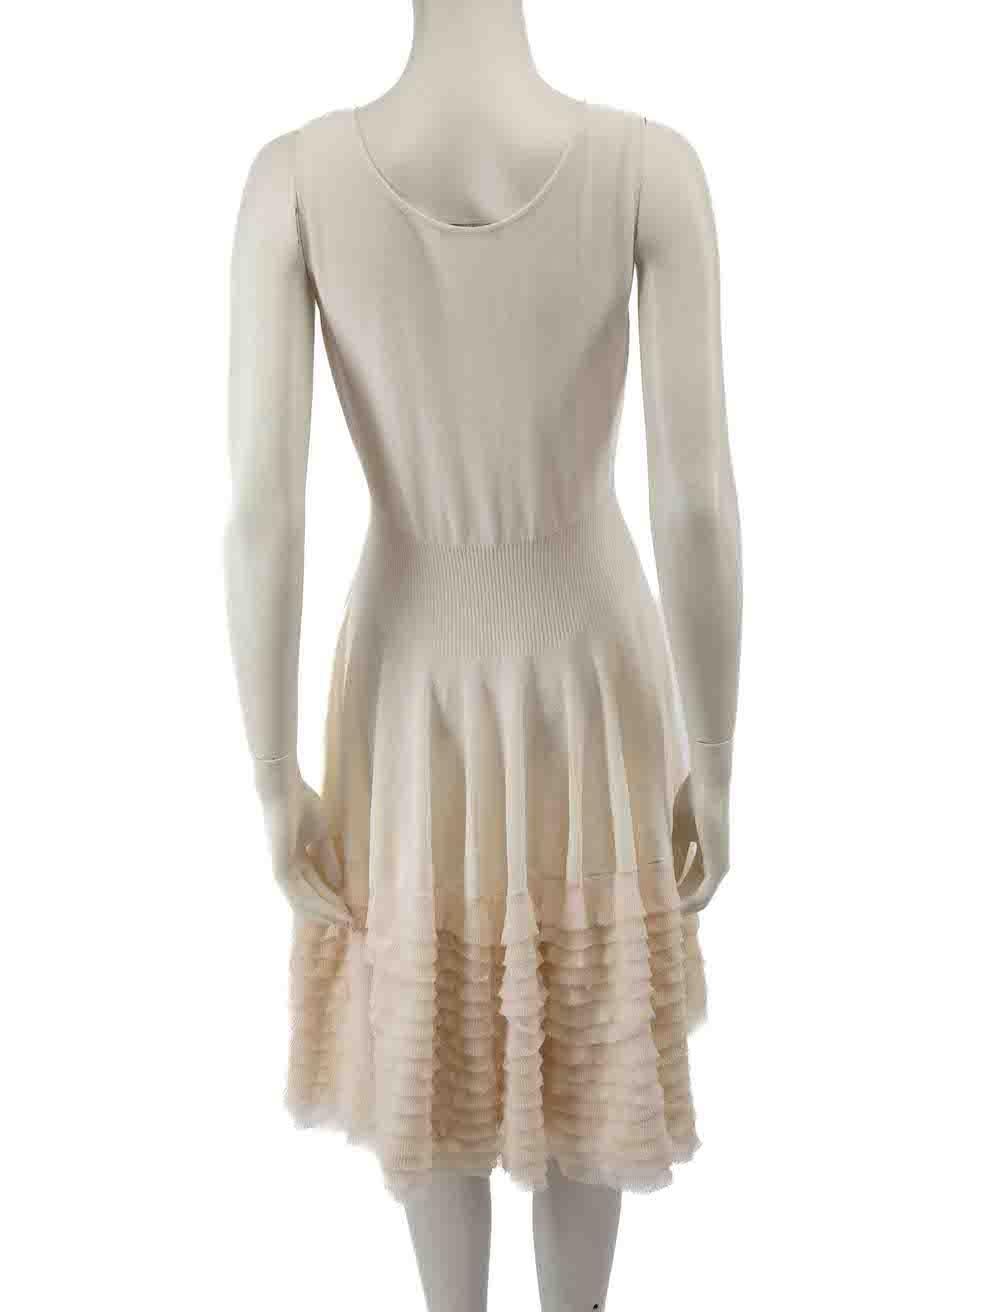 Alexander McQueen White Ruffle Skirt Midi Dress Size S In Good Condition For Sale In London, GB